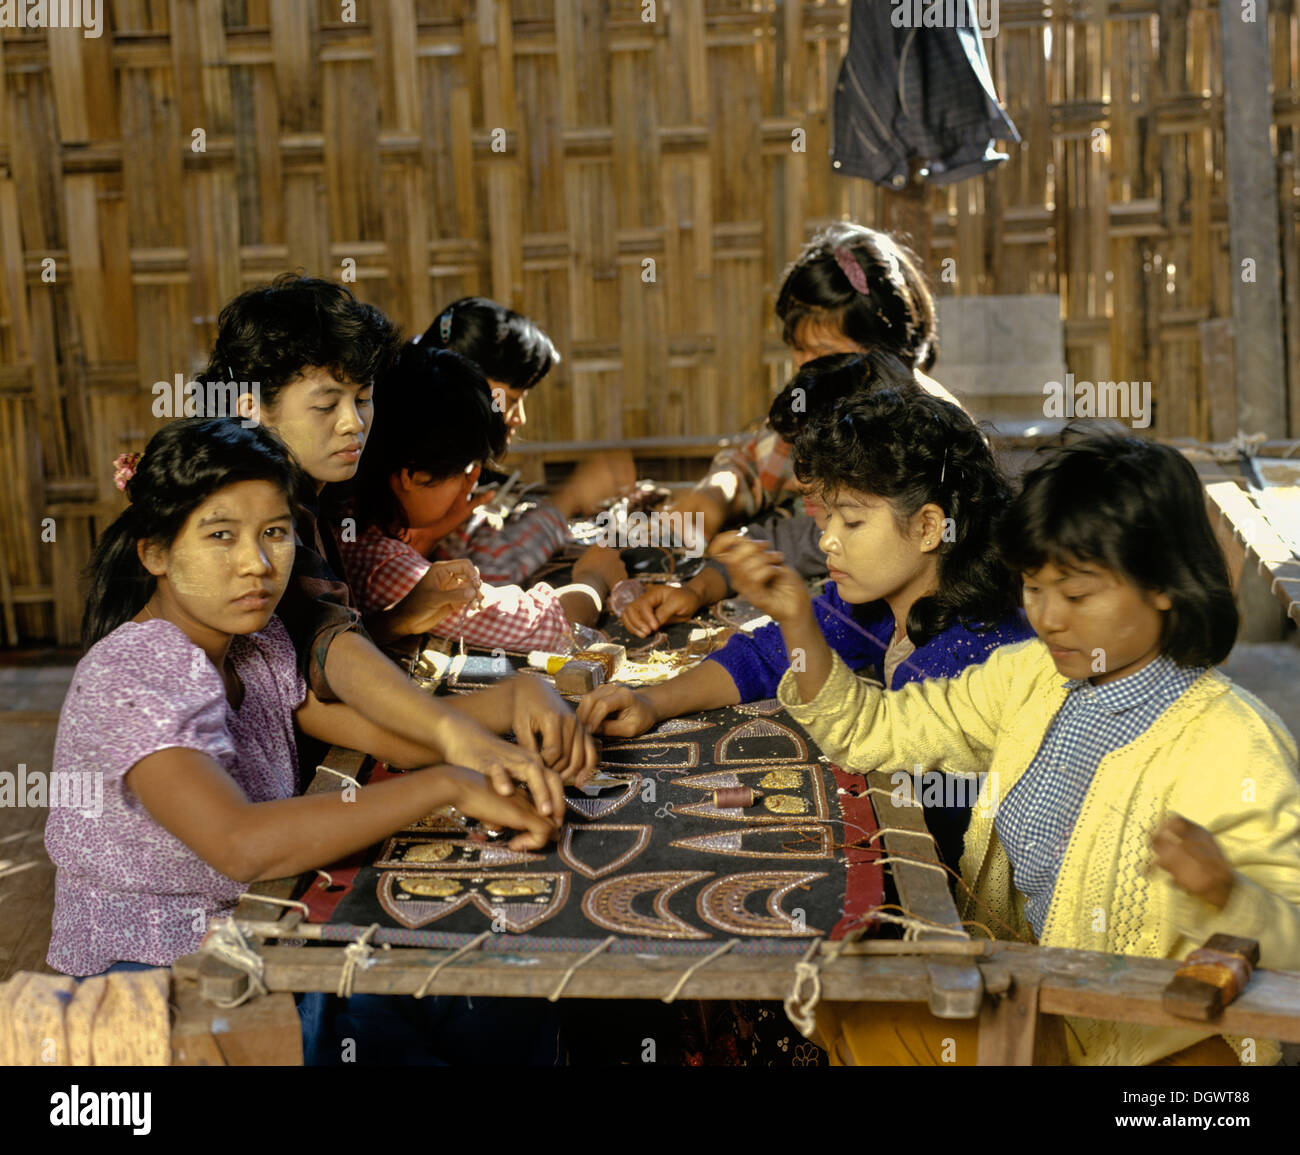 Child labour, young girls with thanaka paste on their faces at work, Mandalay, Mandalay Division, Myanmar, Burma Stock Photo